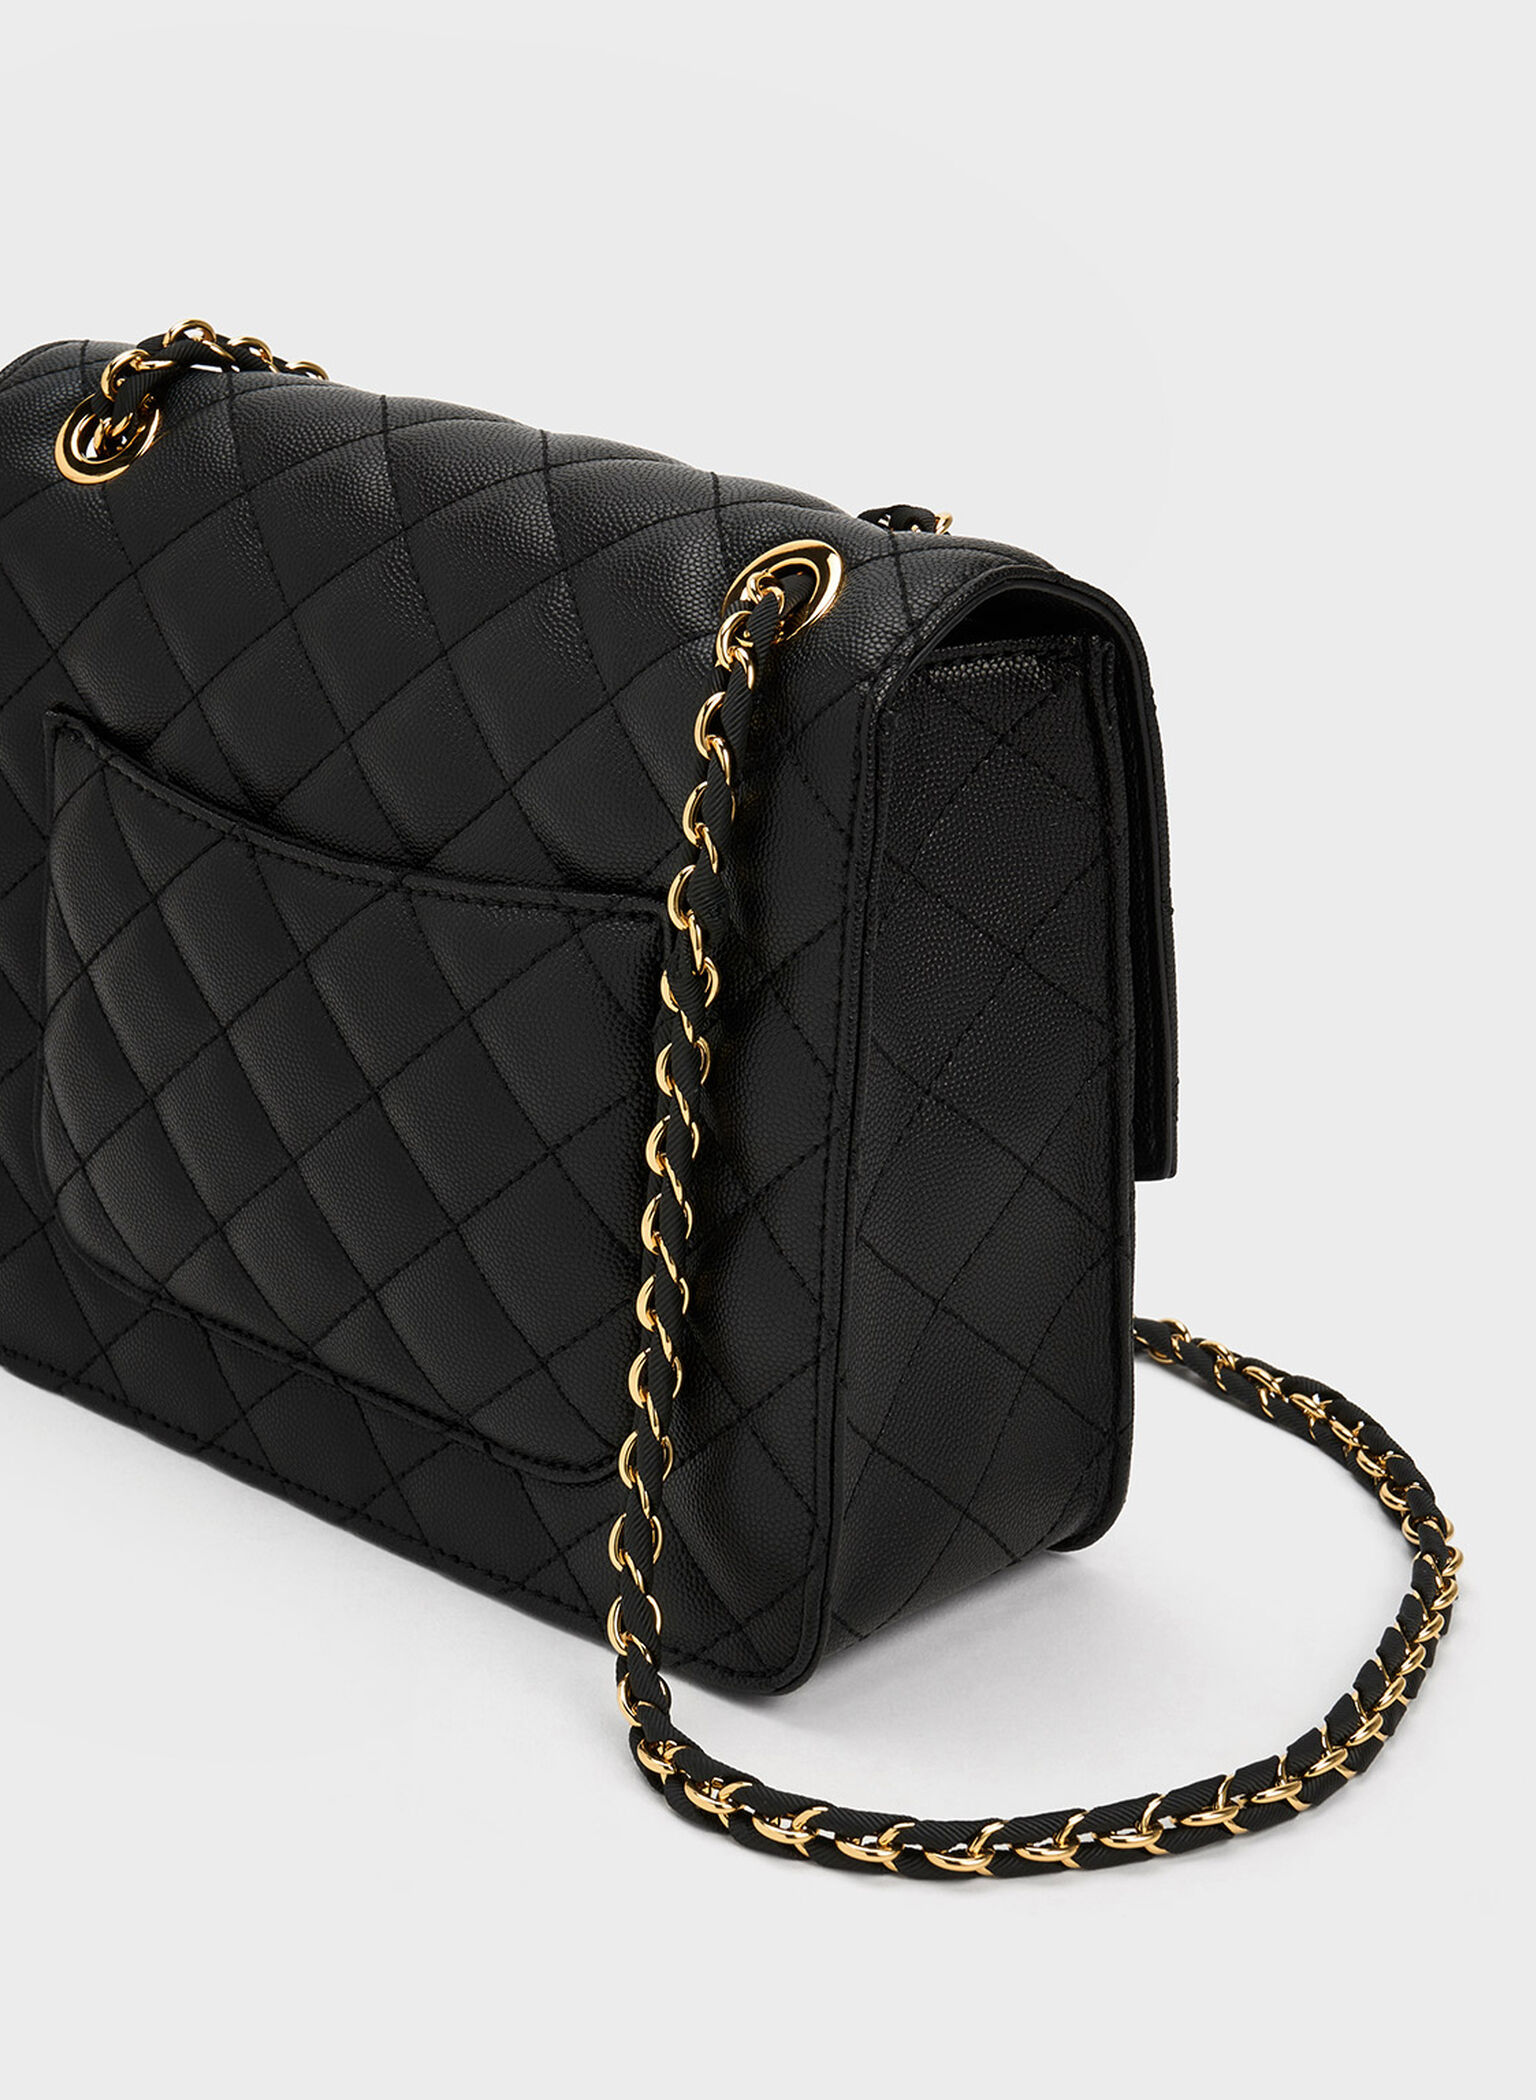 Black Cressida Quilted Chain Strap Bag - CHARLES & KEITH UK